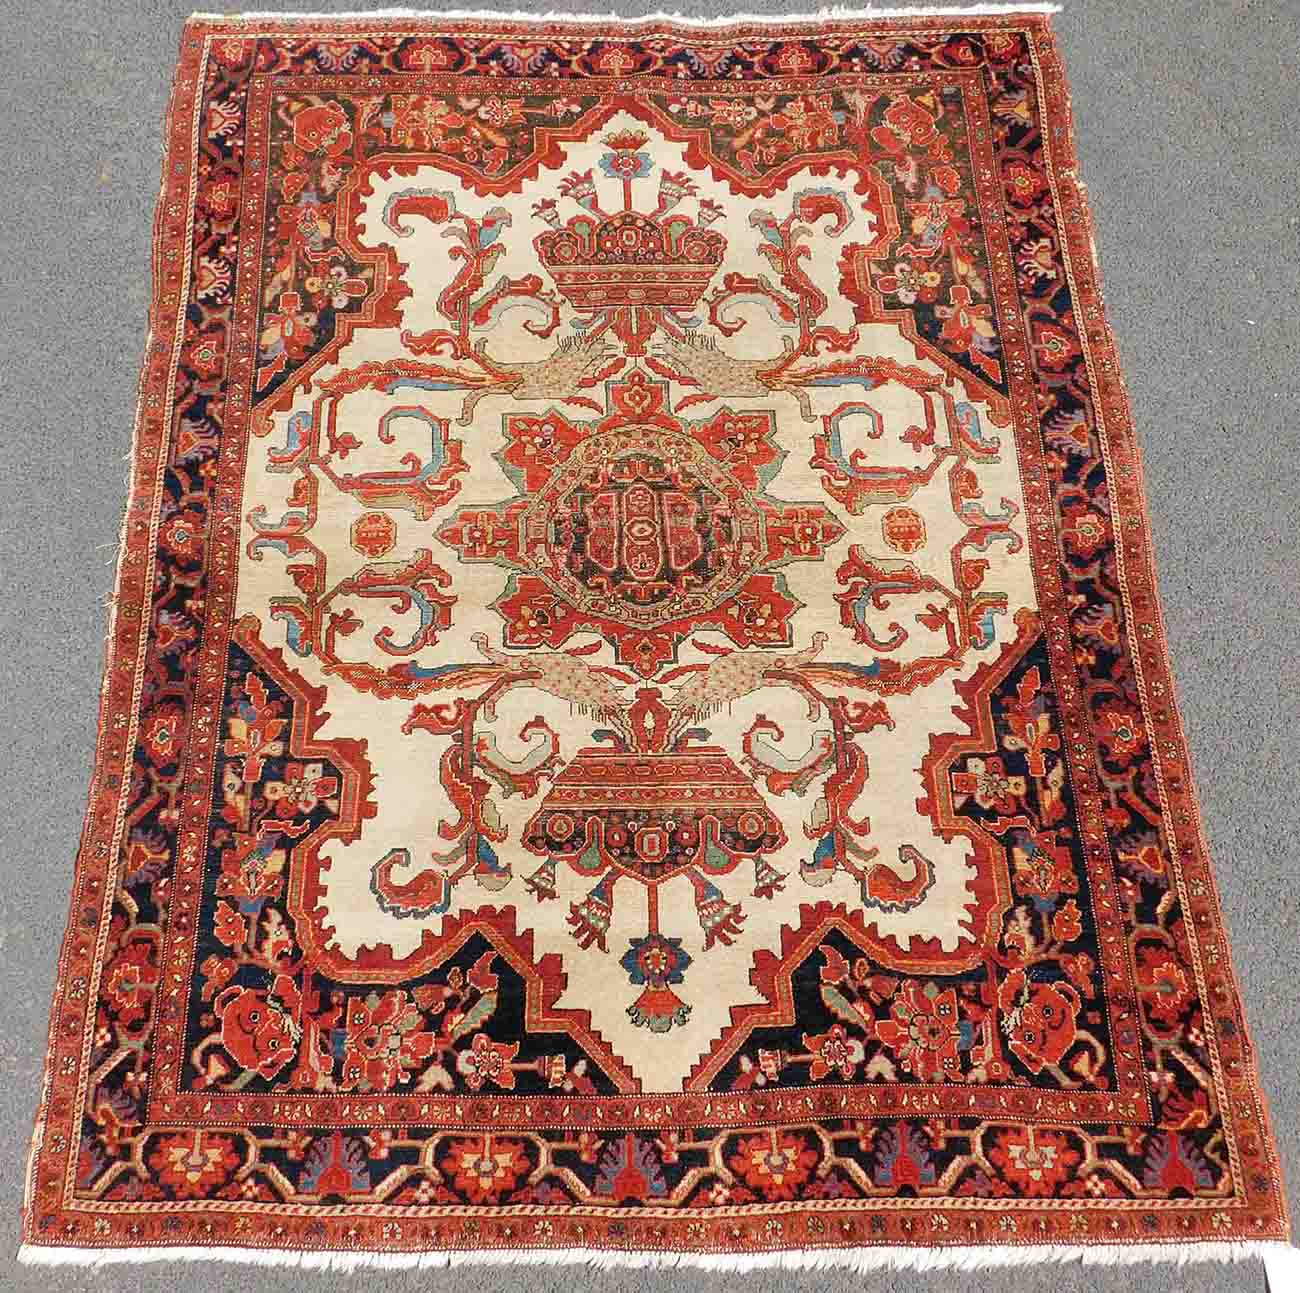 Mishan Malayer Persian rug. Iran. Antique, around 1880.191 cm x 143 cm. Knotted by hand. Wool on